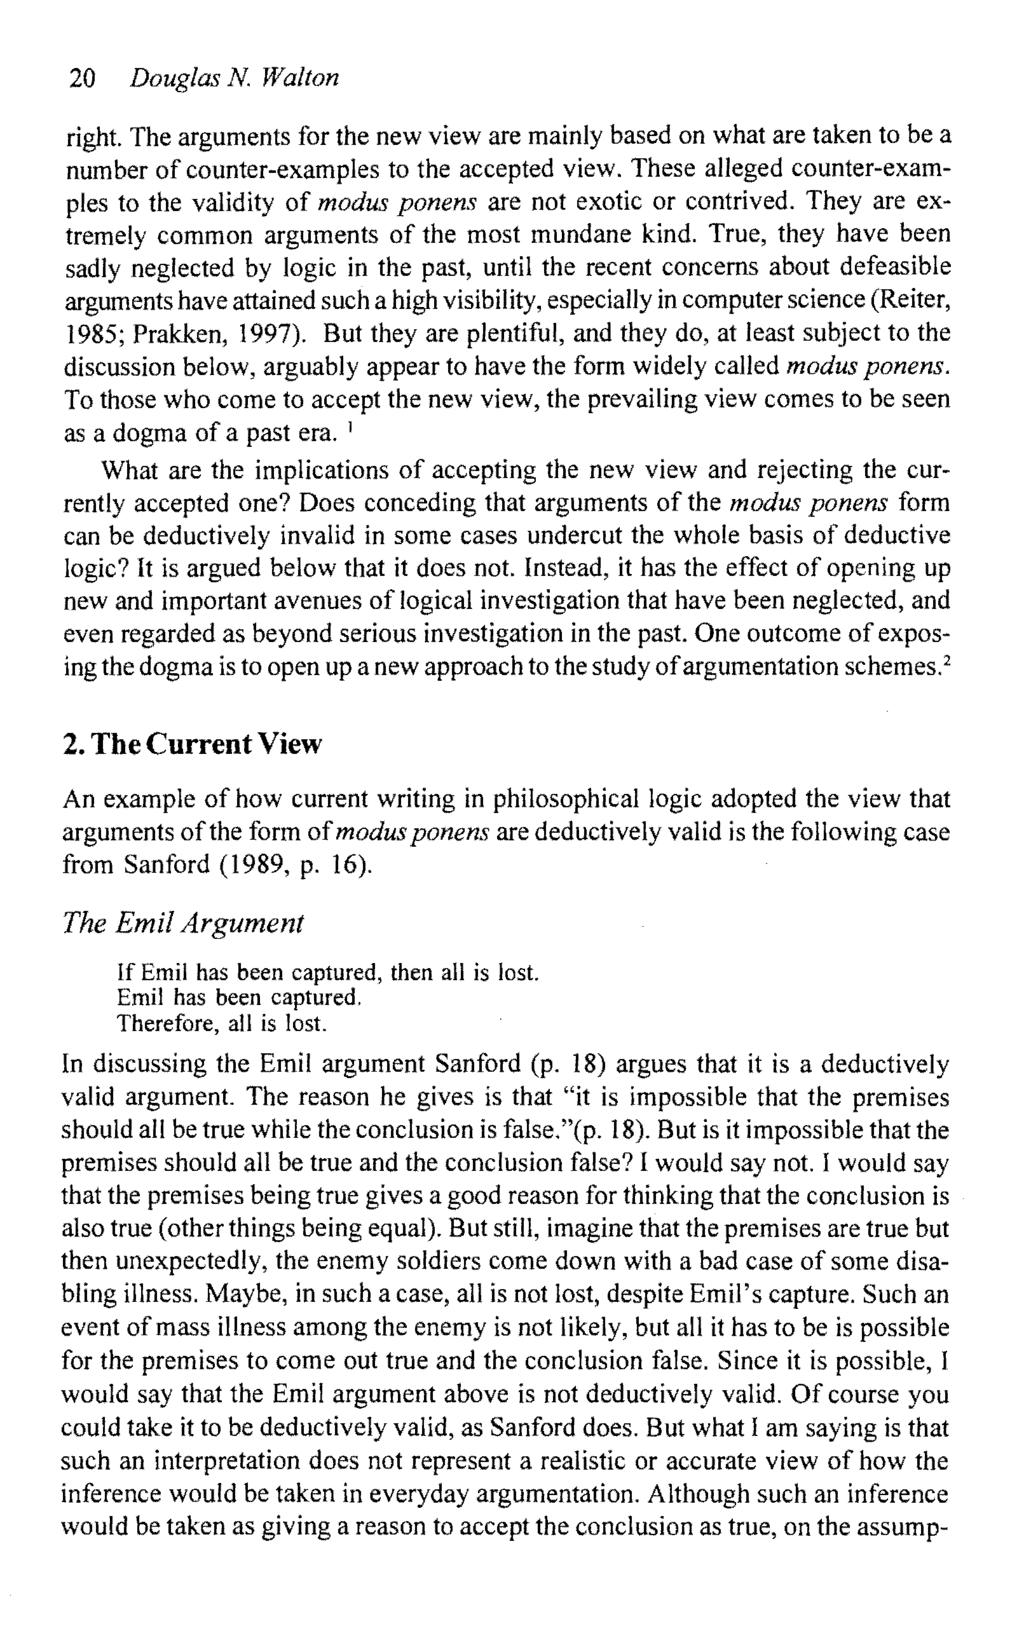 20 Doug/as N. Walton right. The arguments for the new view are mainly based on what are taken to be a number of counter-examples to the accepted view.